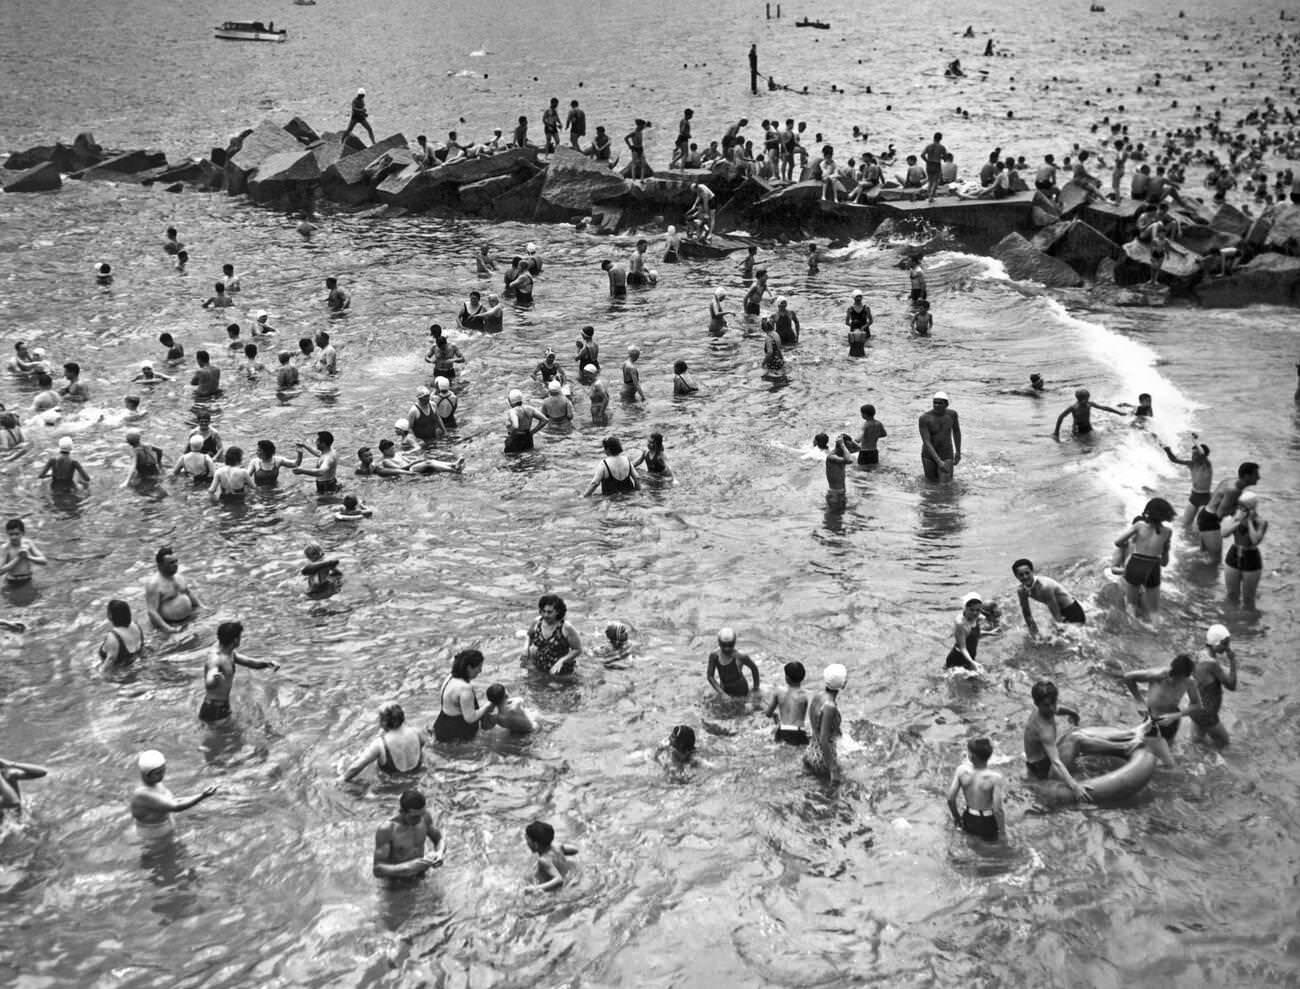 Bathers In The Surf At Coney Island, Brooklyn, July 1938